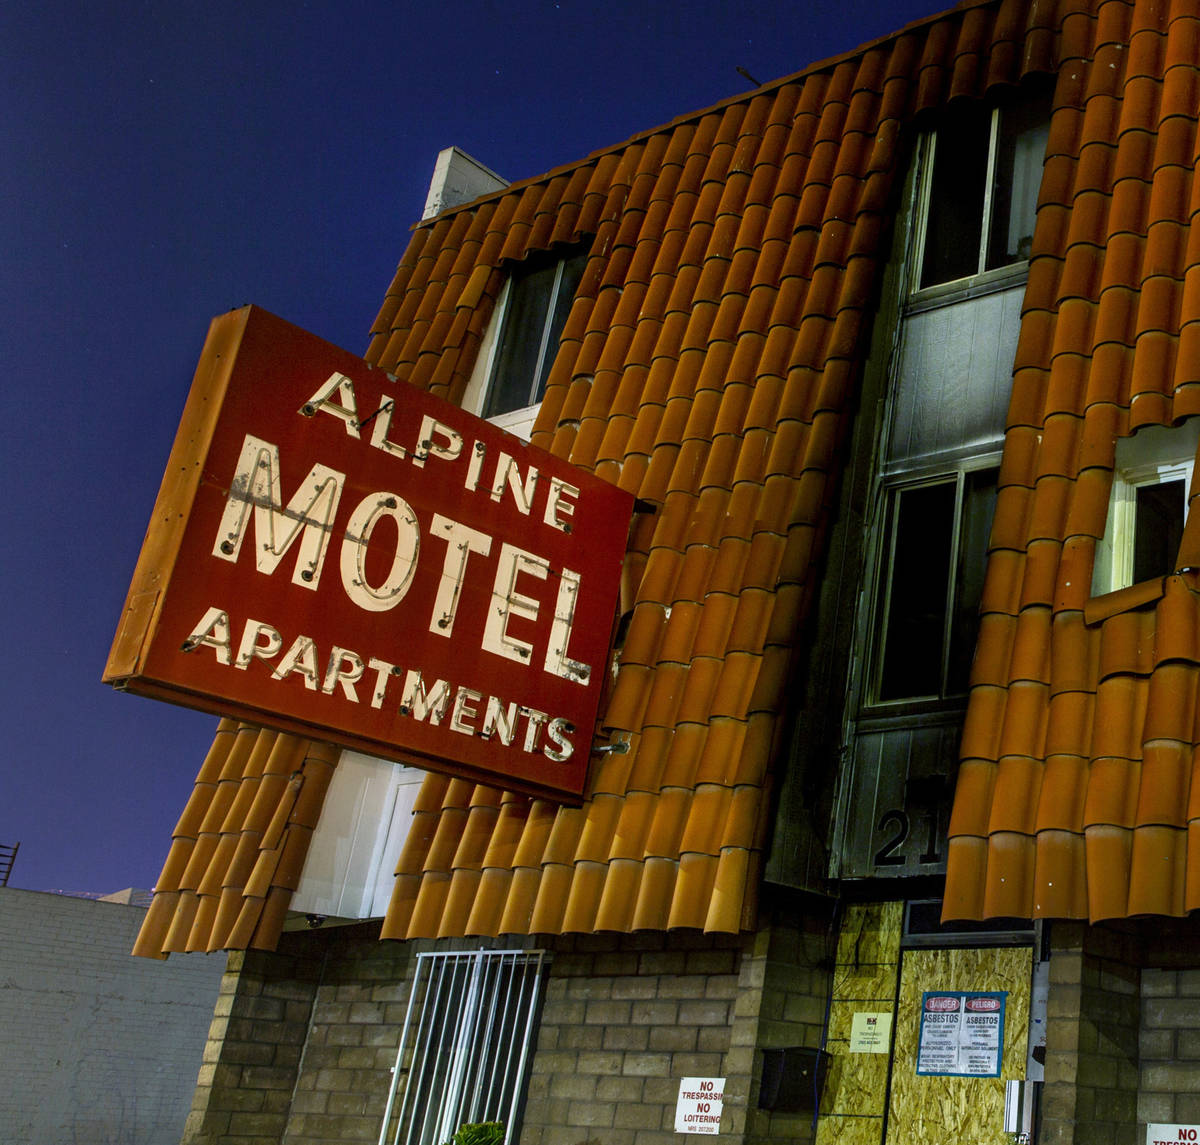 Exterior at night of the Alpine Motel Apartments on Sunday, Feb. 23, 2020, in Las Vegas. (L.E. ...